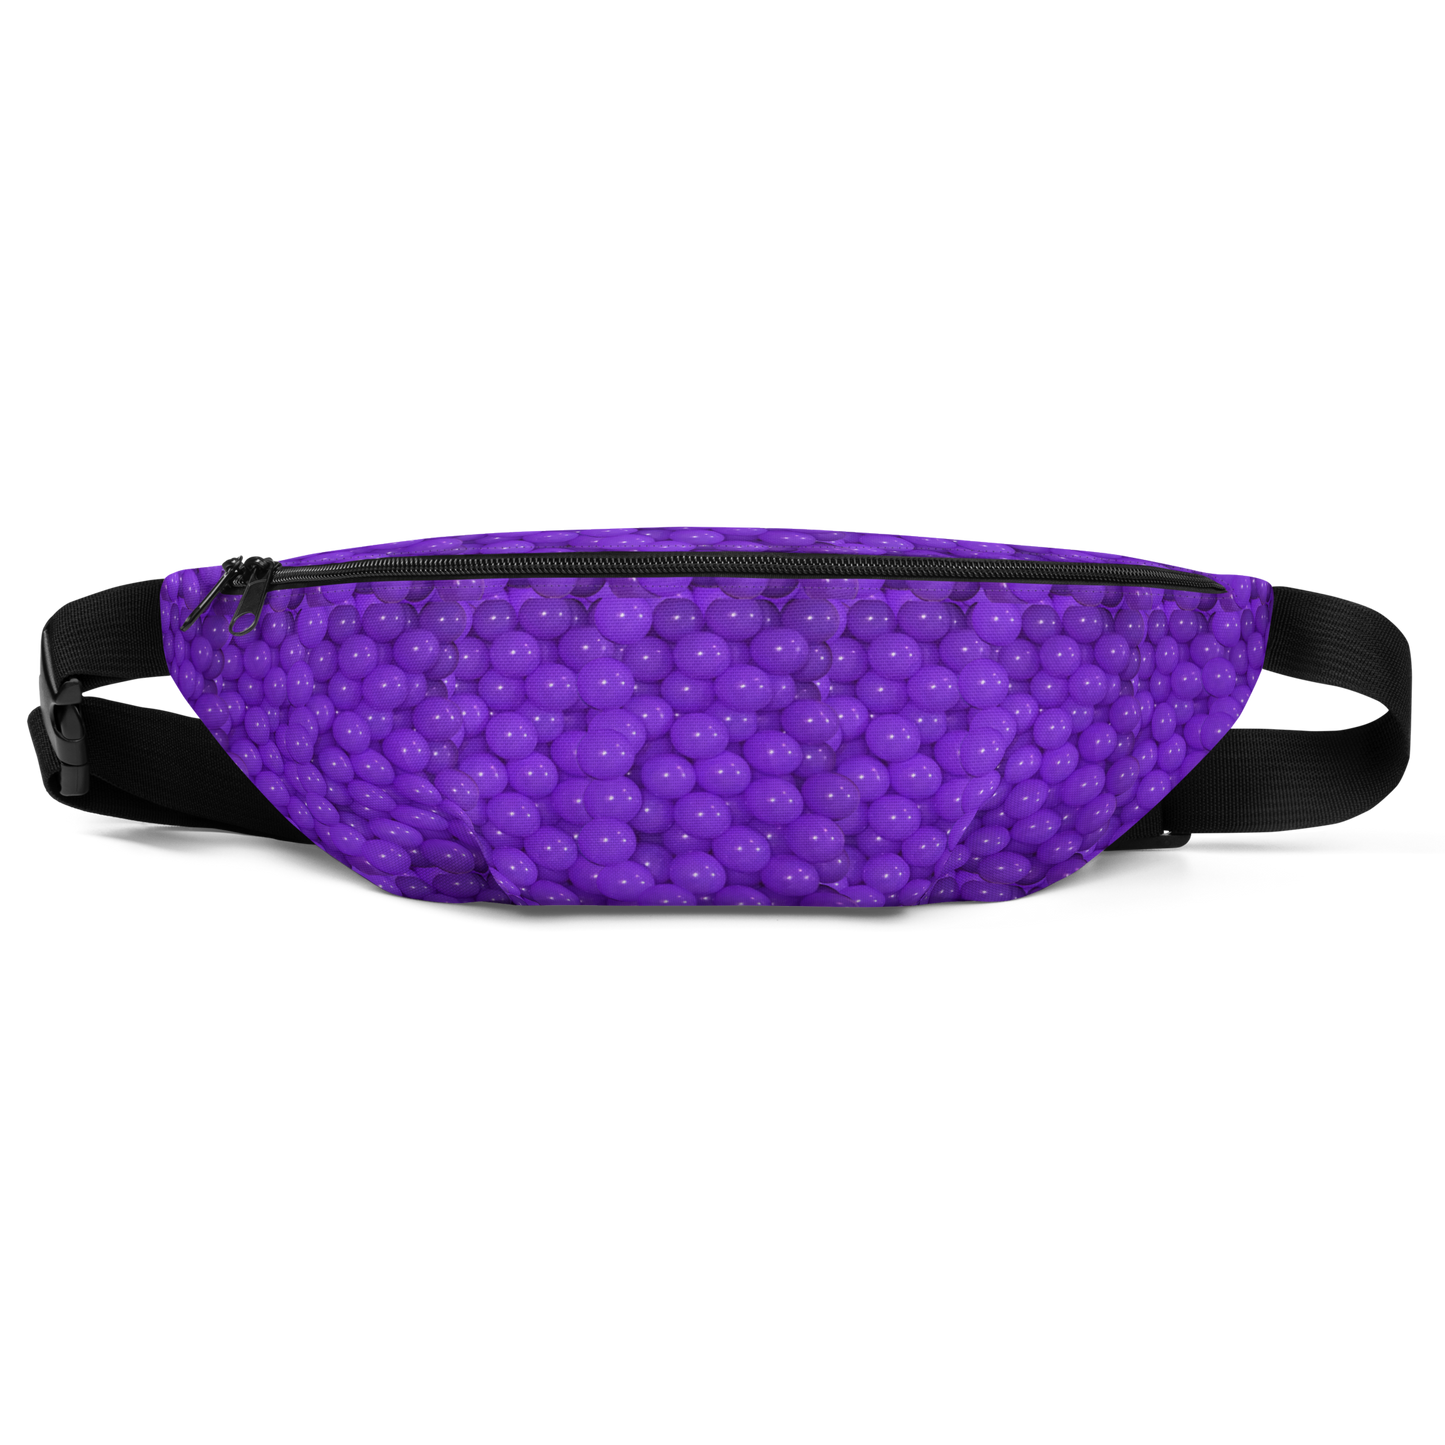 Ball Pit in Purple Fanny Pack